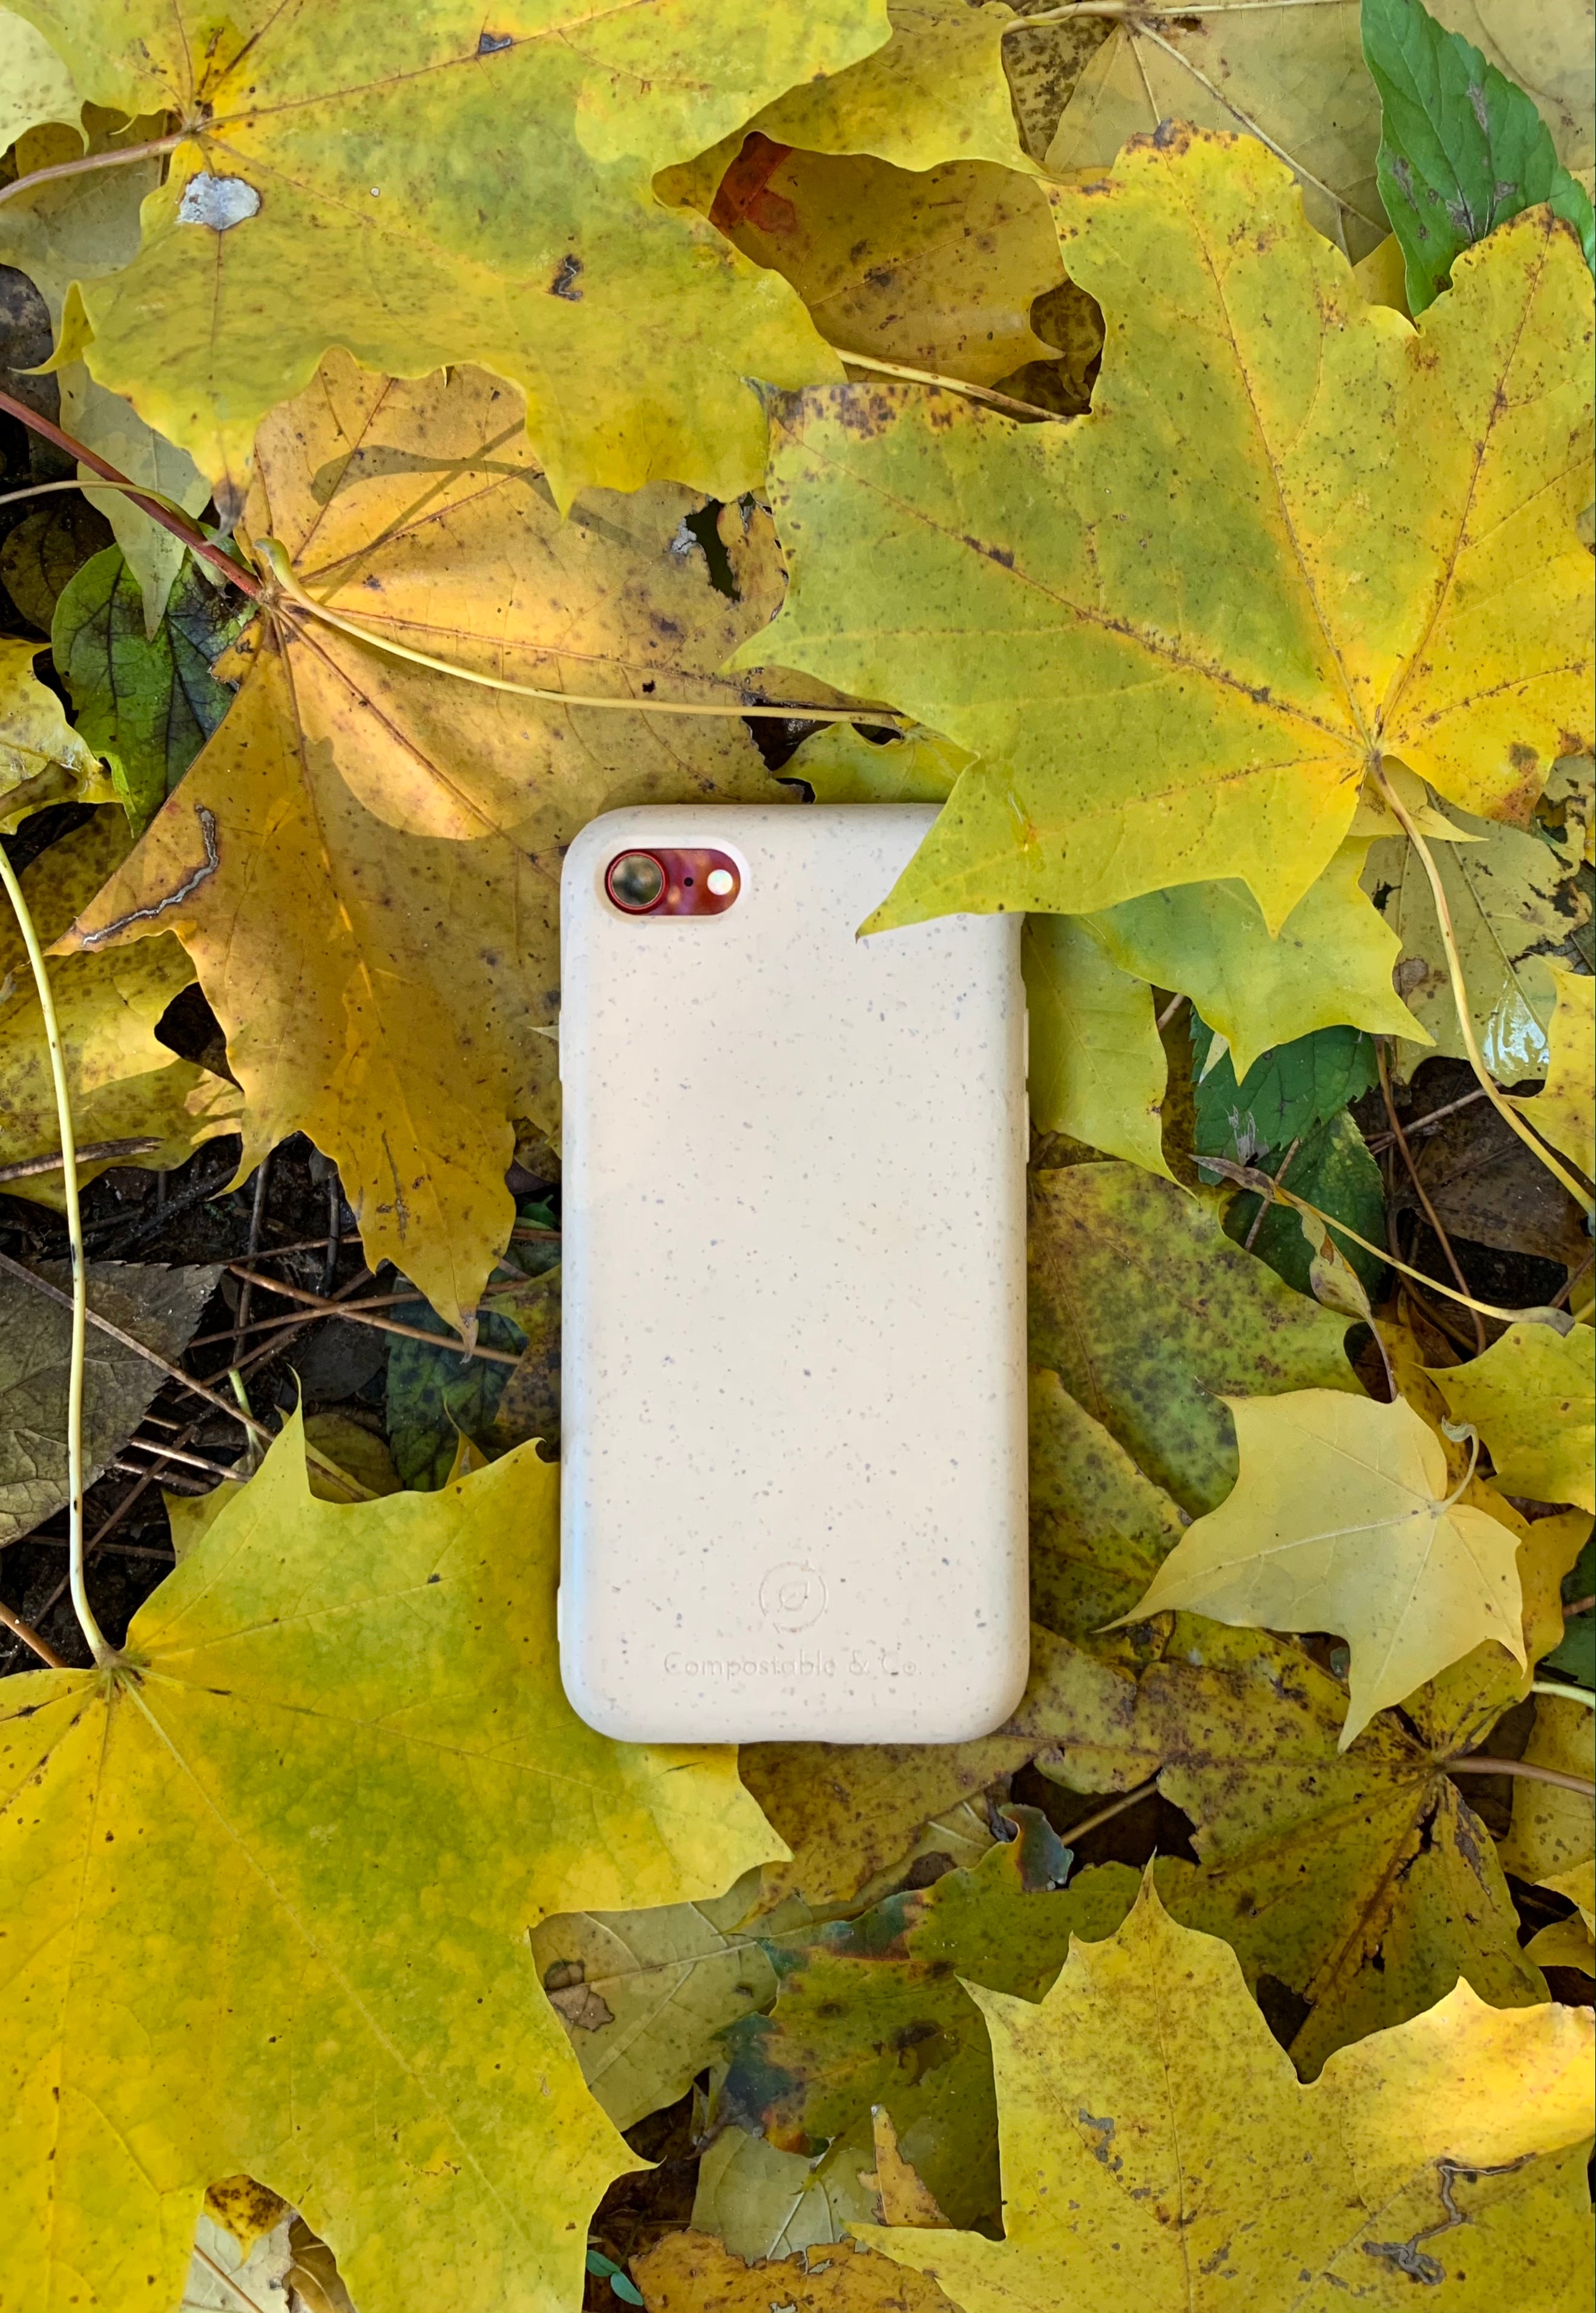 Compostable & Co. iPhone 7 / 8 / SE 2020 white biodegradable phone case in nature